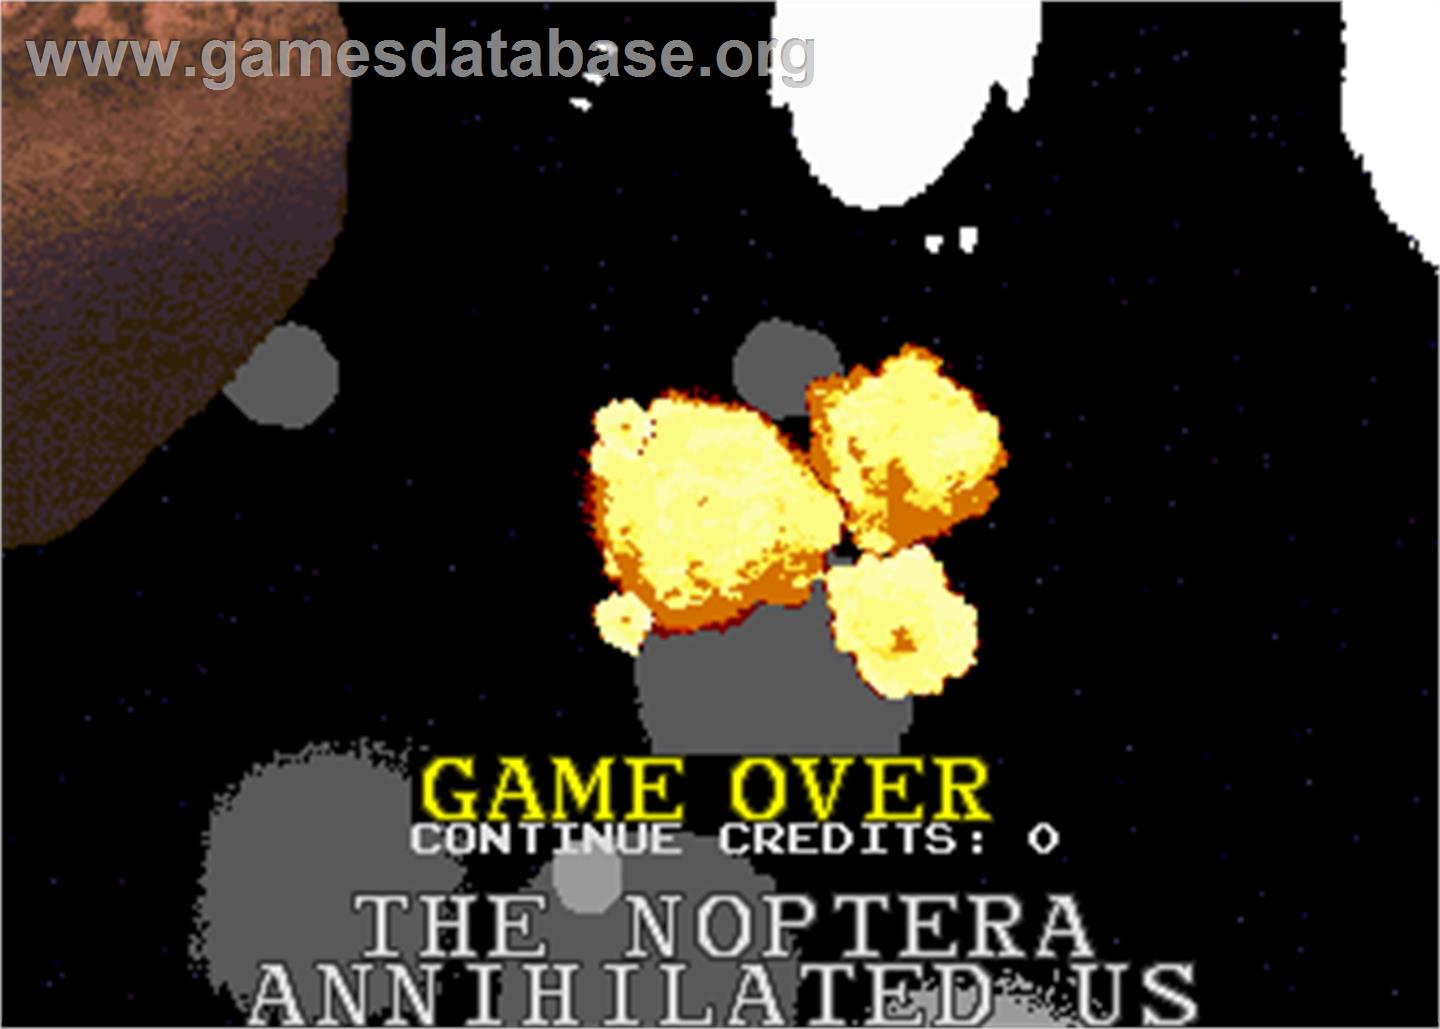 Space Lords - Arcade - Artwork - Game Over Screen